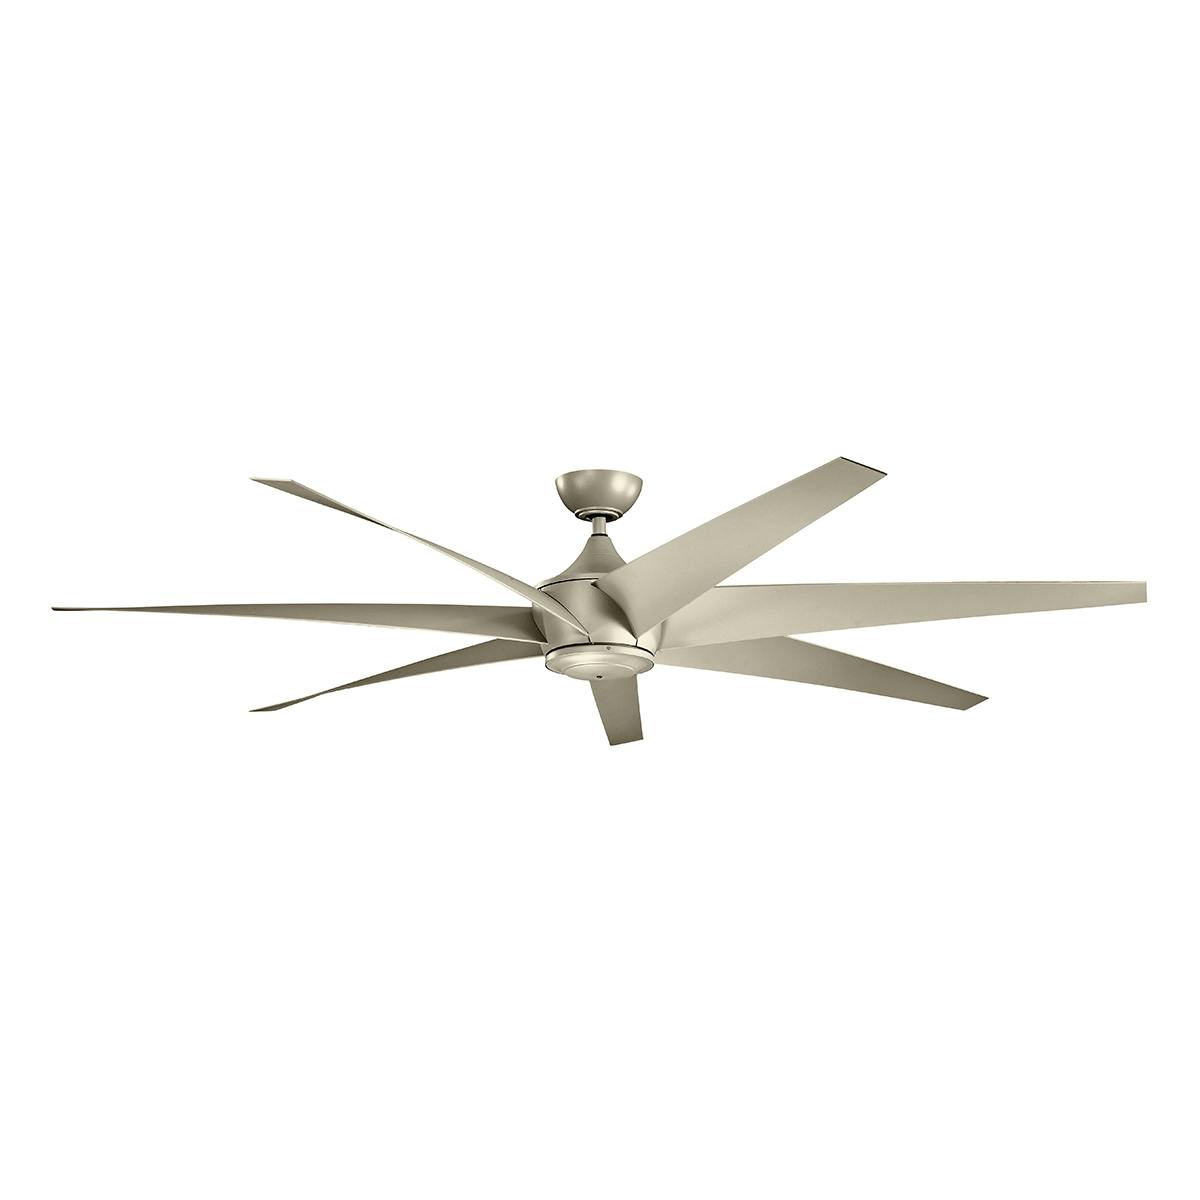 Lehr 80" Fan Antique Satin Silver on a white background